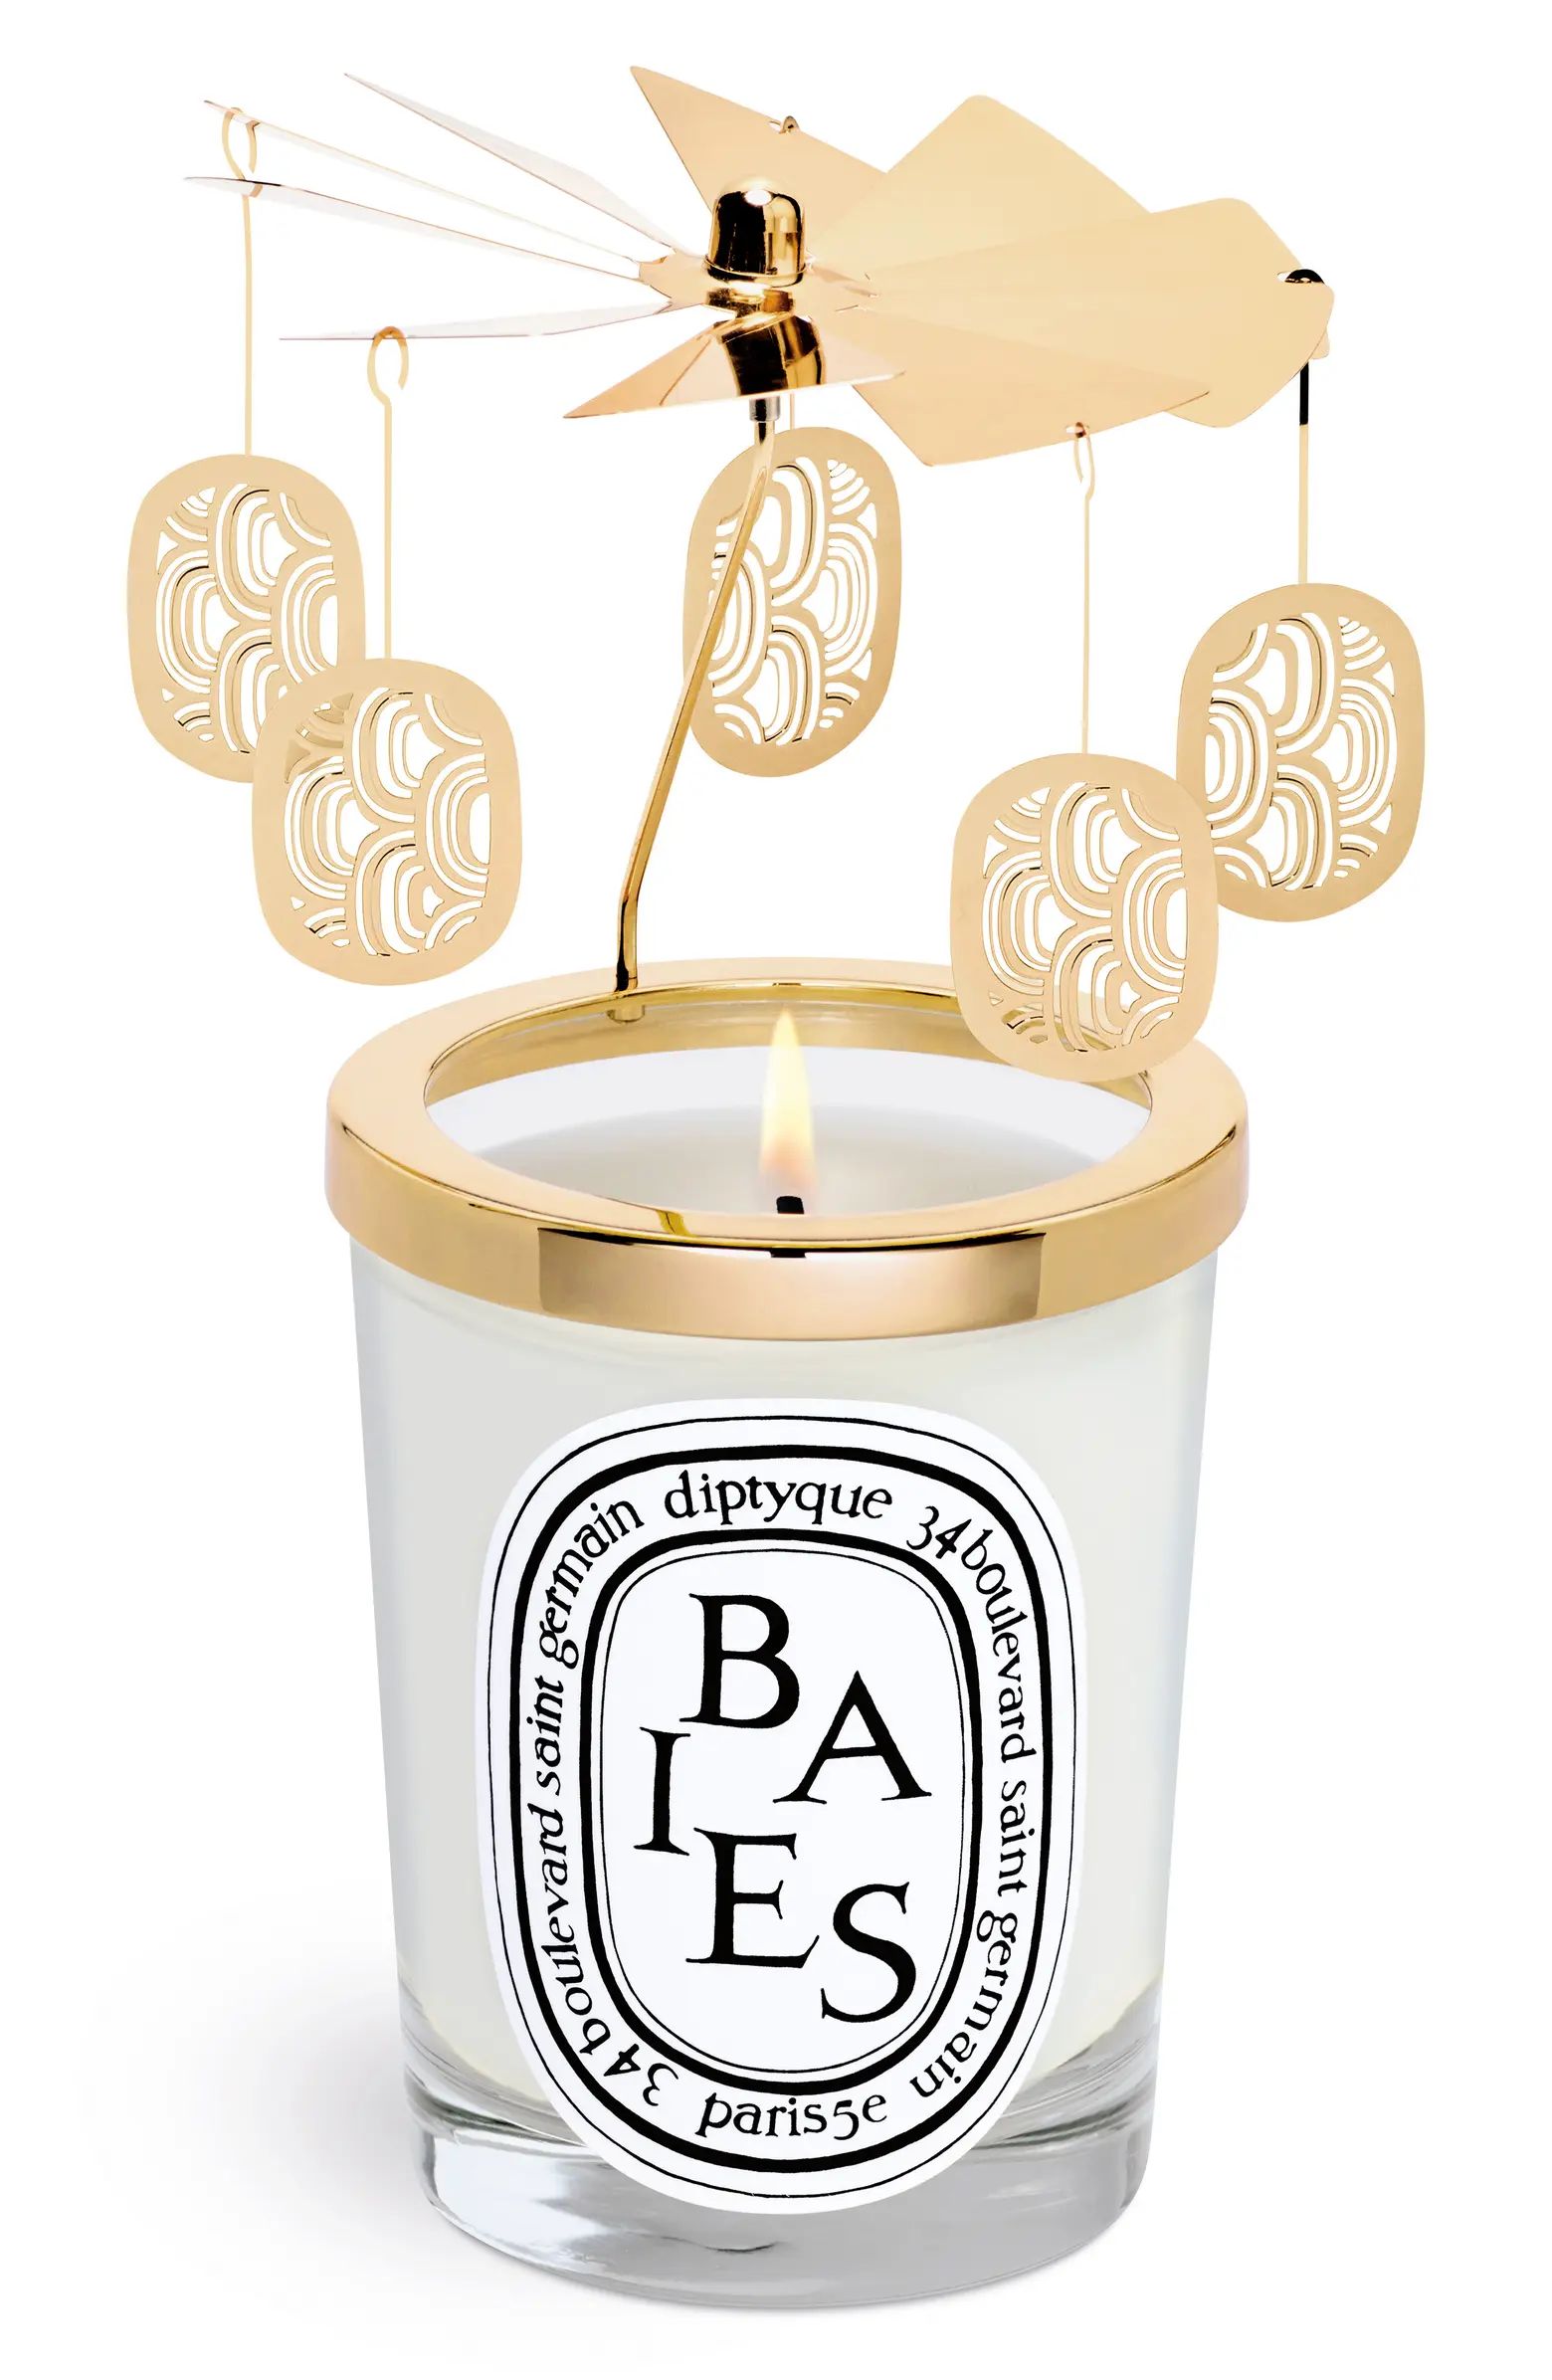 Baies Candle & Carousel Set | Nordstrom